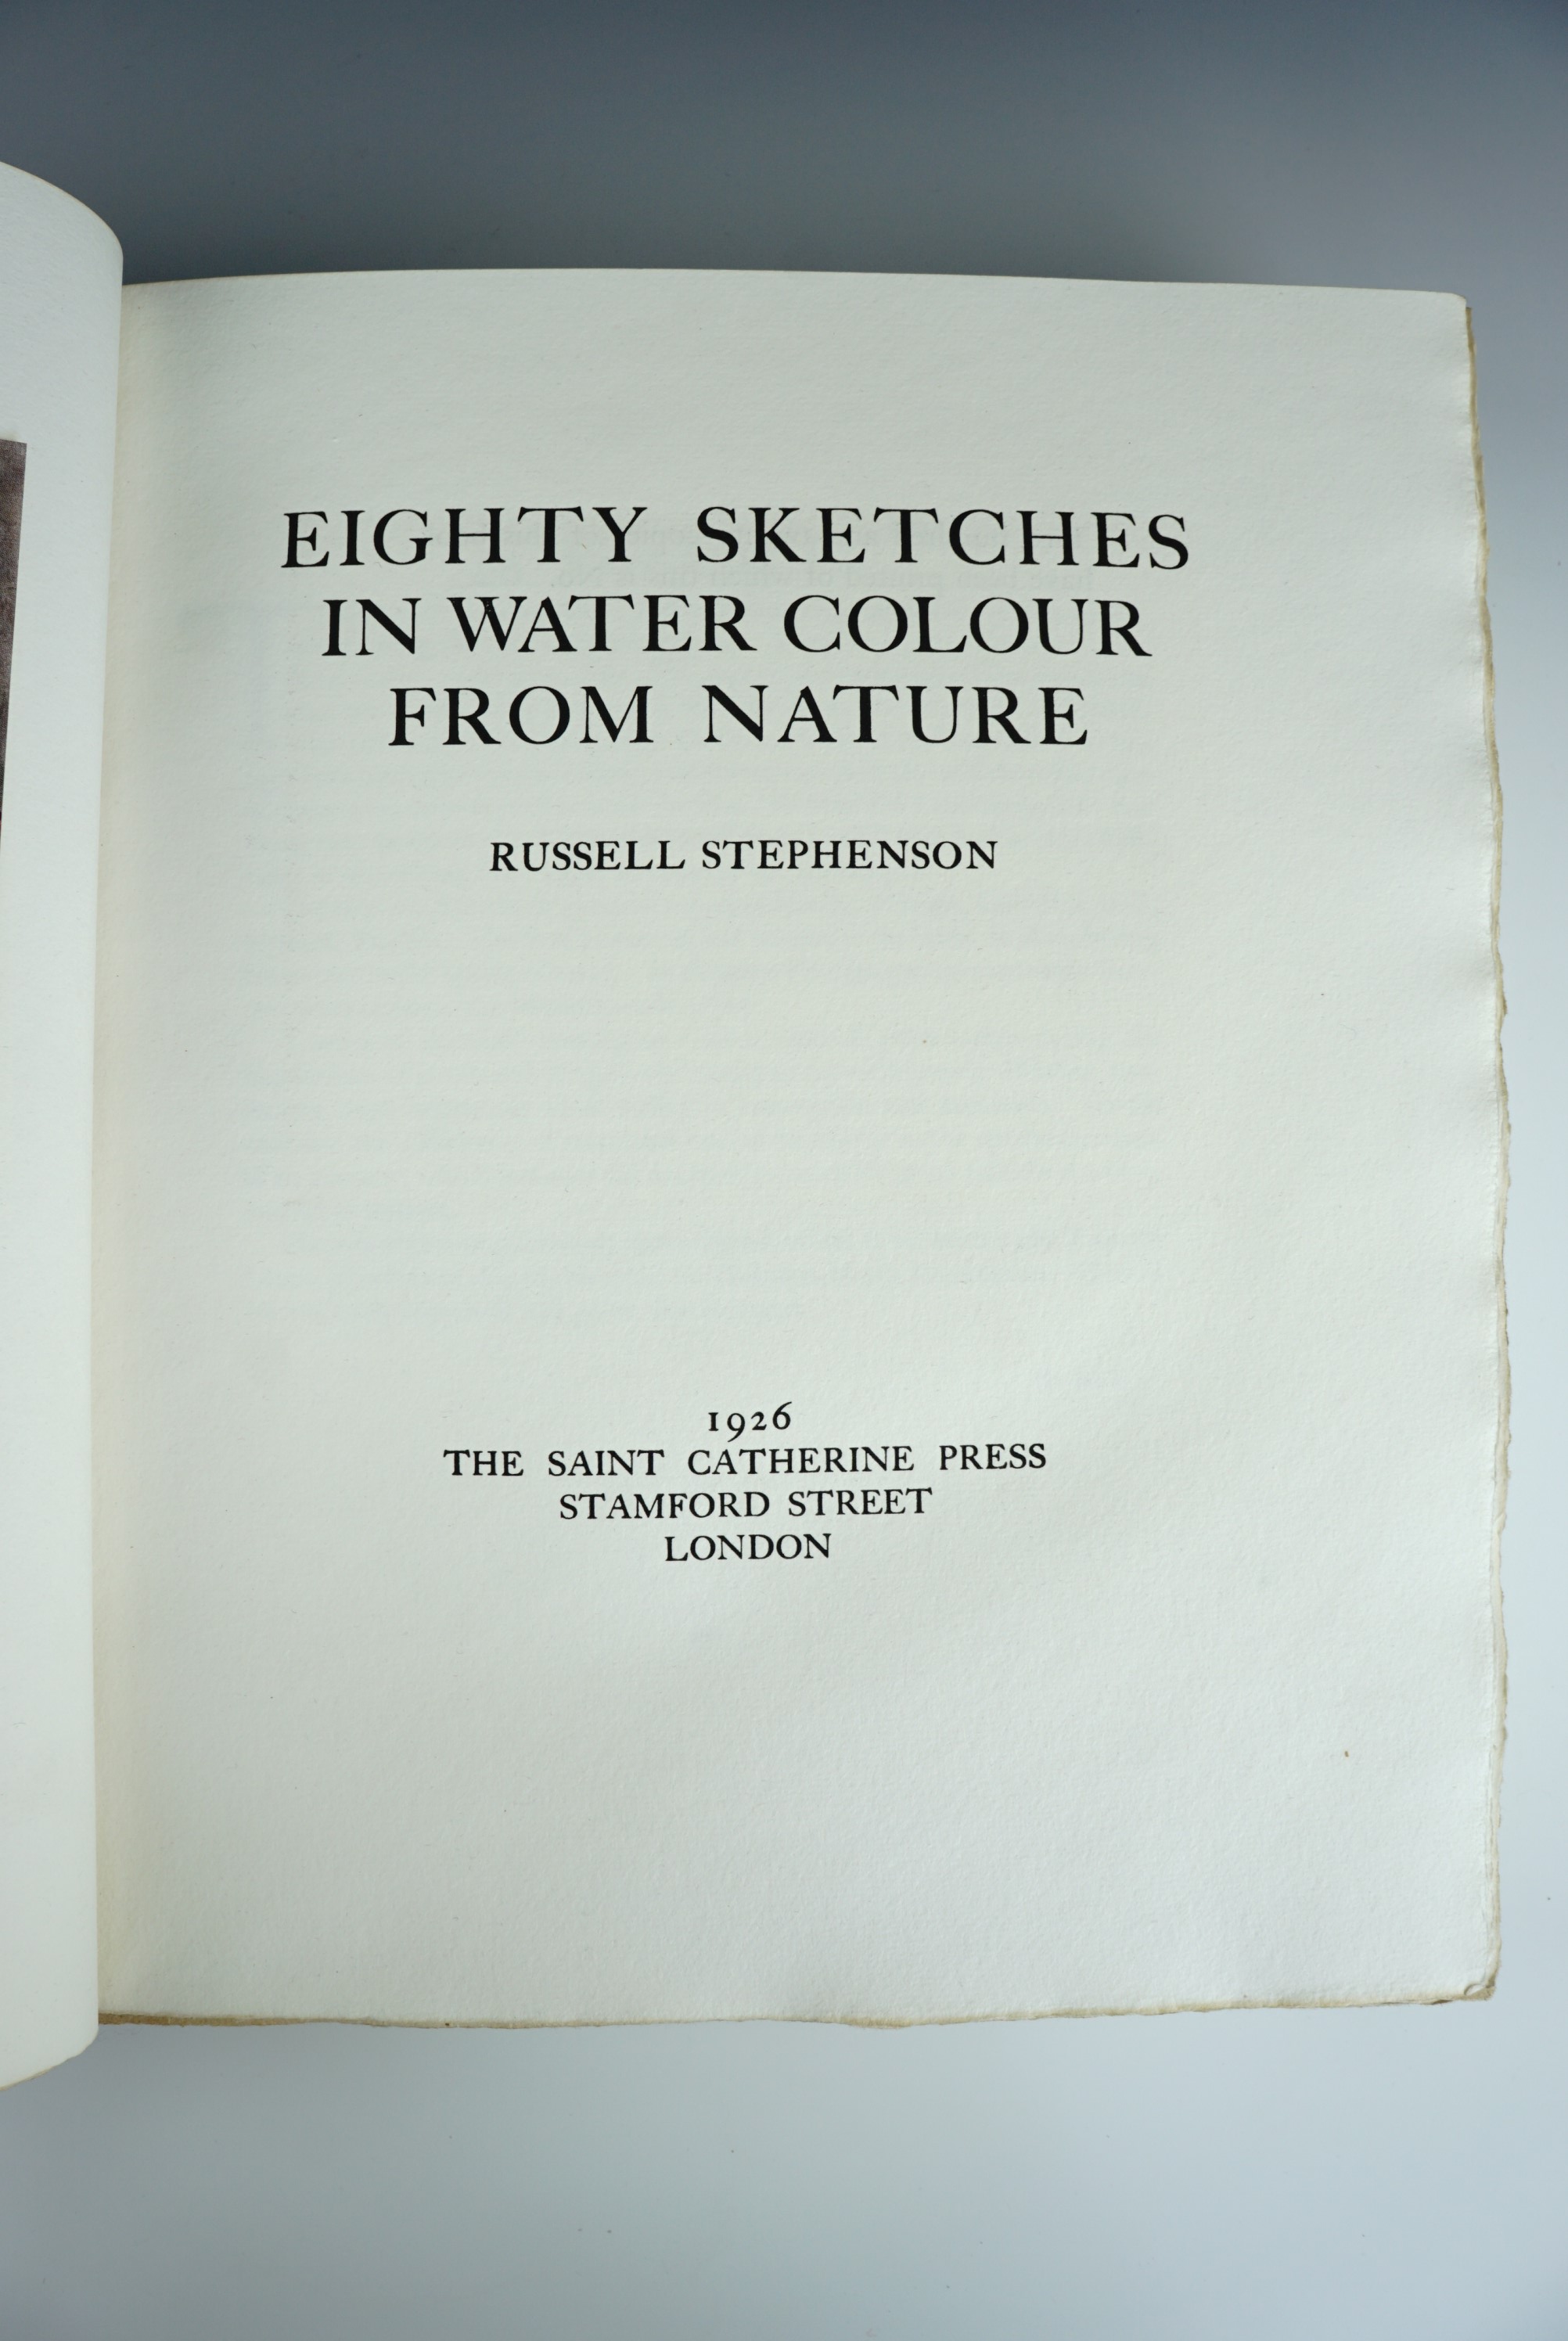 Russell Stephenson, "Eighty Sketches in Water Colour from Nature", London, St Catherine Press, 1926, - Image 3 of 11